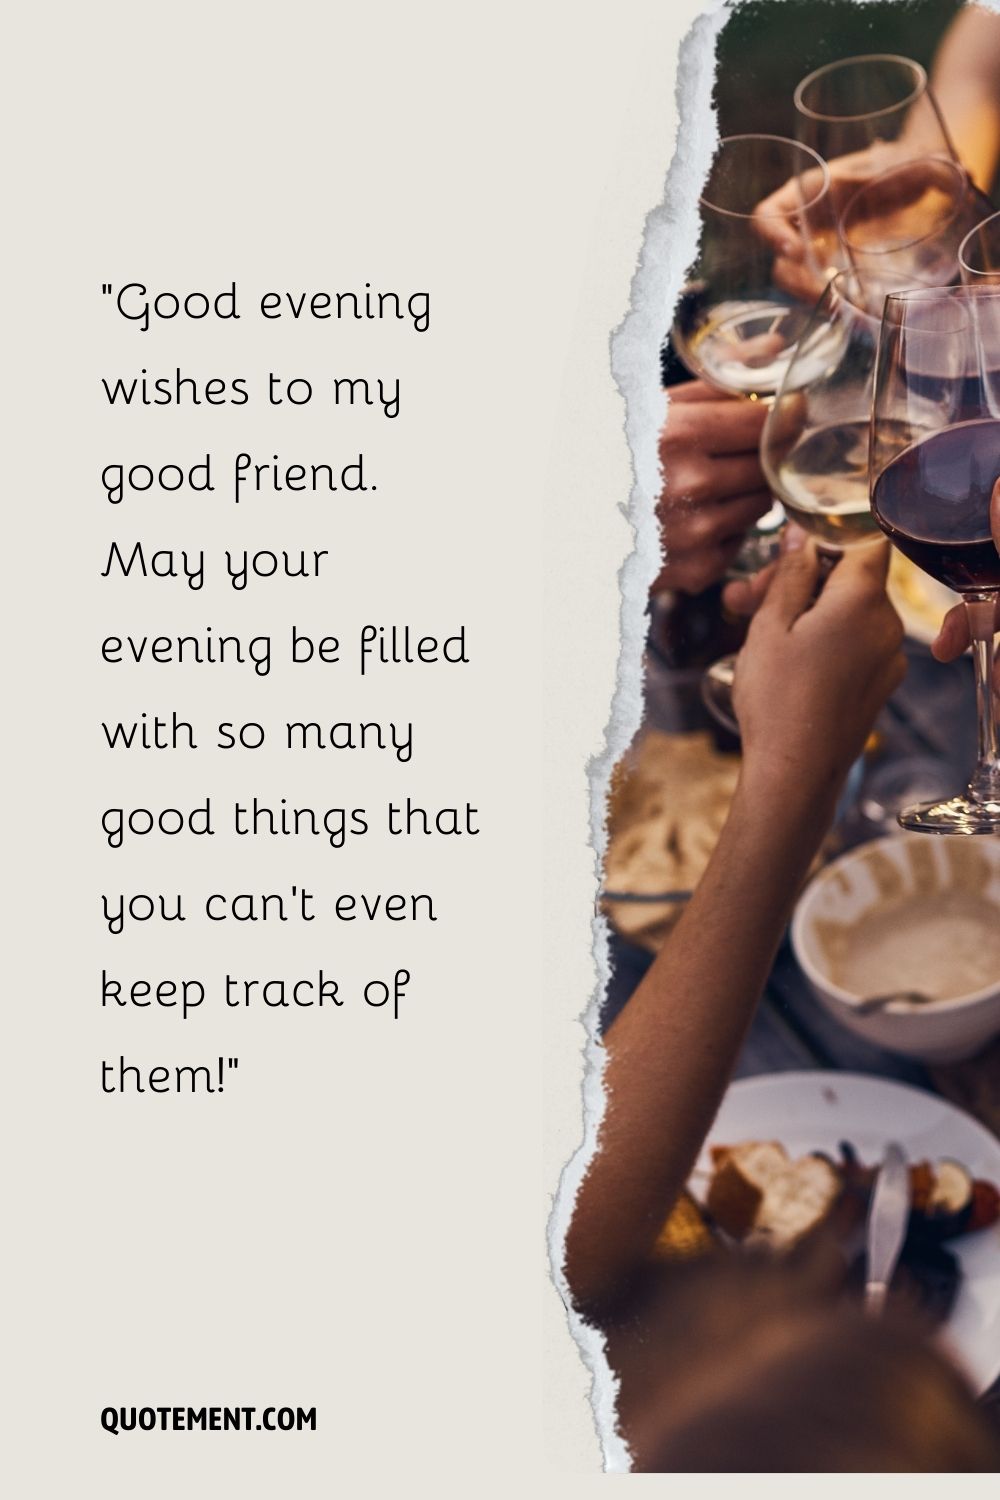 A group of people clinking wine glasses over a dinner table representing the top good evening message for friends
